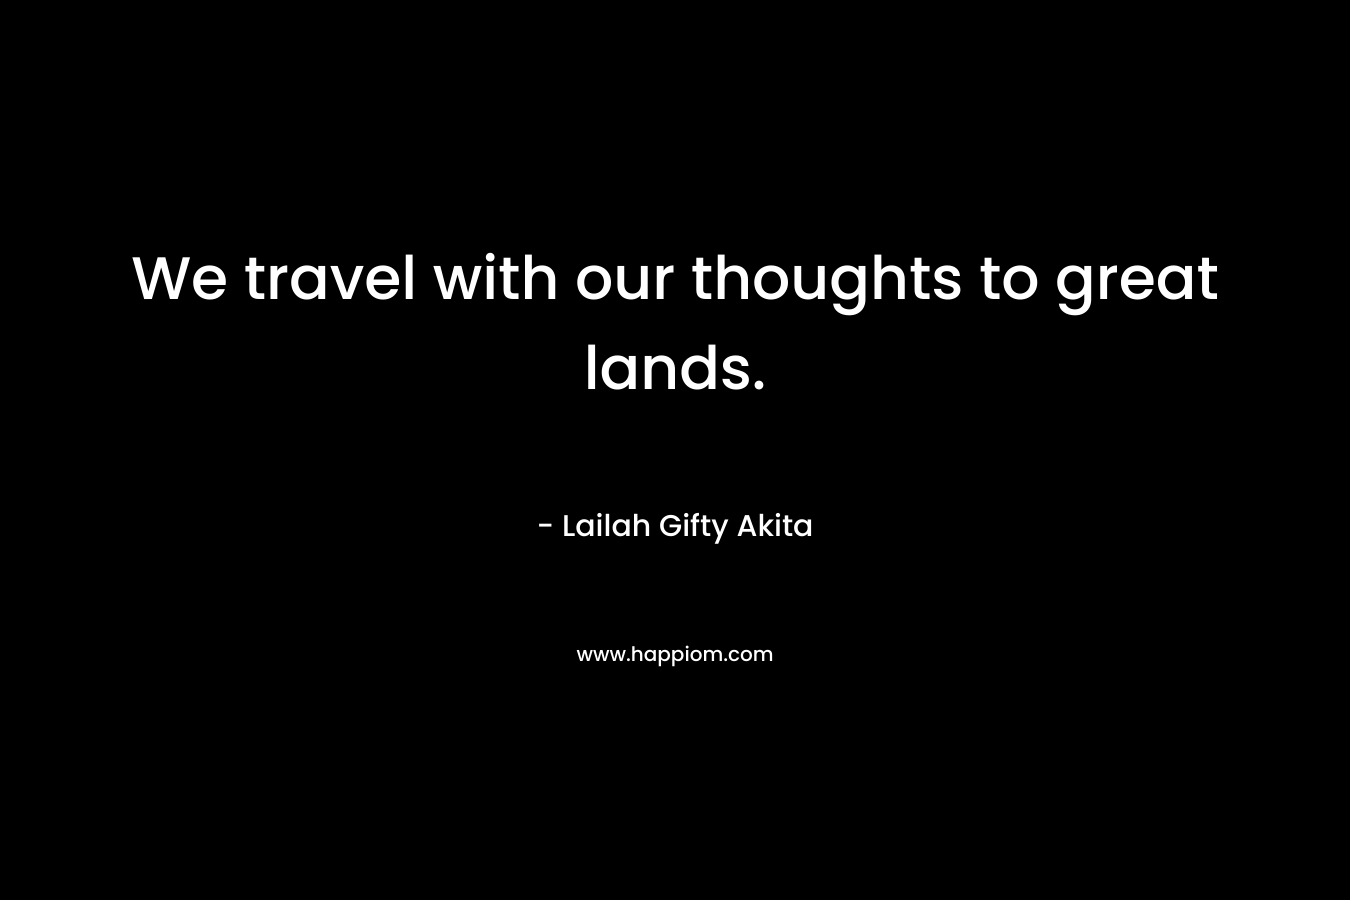 We travel with our thoughts to great lands.